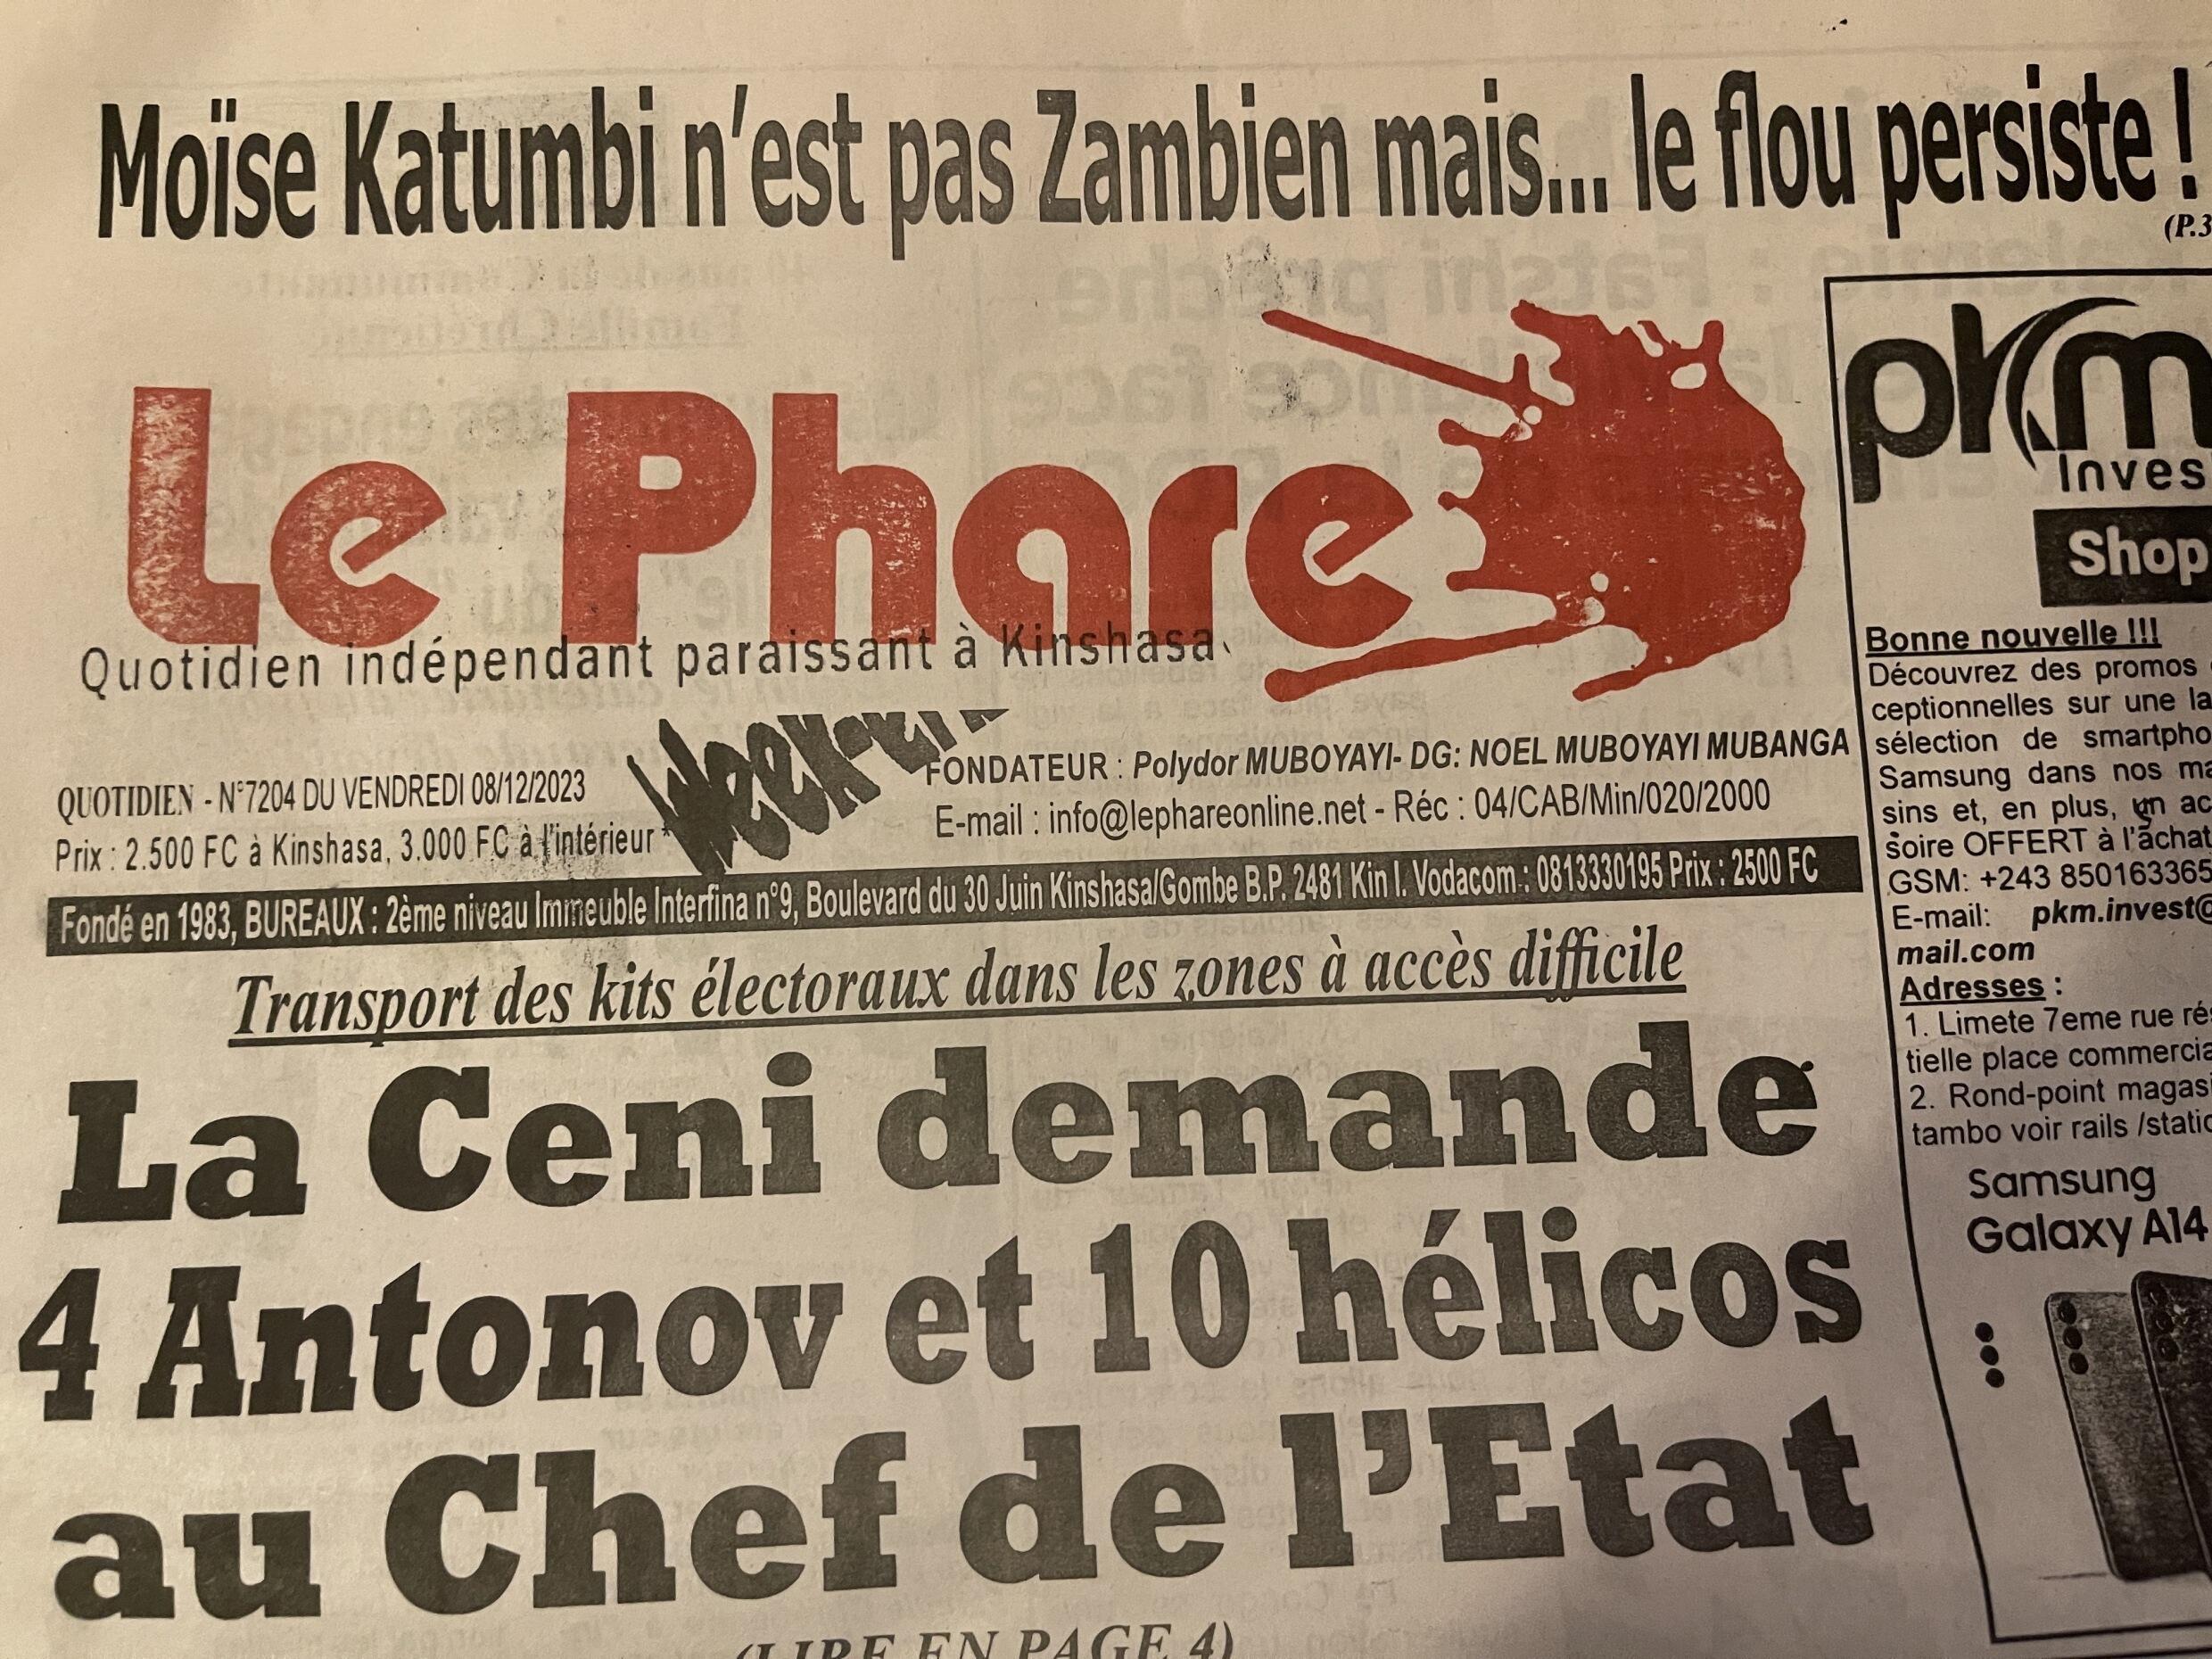 The front page of the newspaper Le Phare